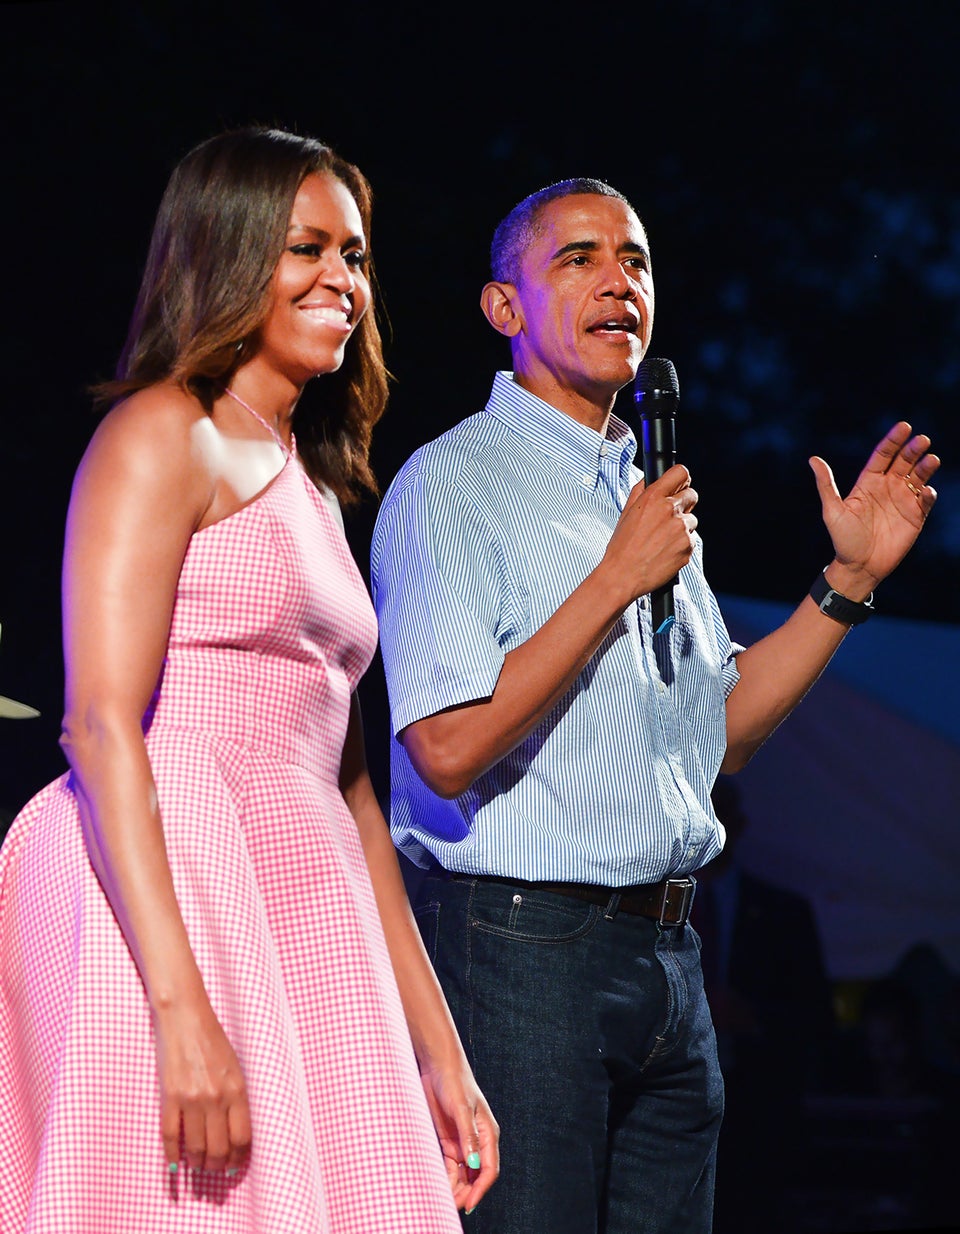 The Obamas Scheduled to Appear at SXSW in Austin